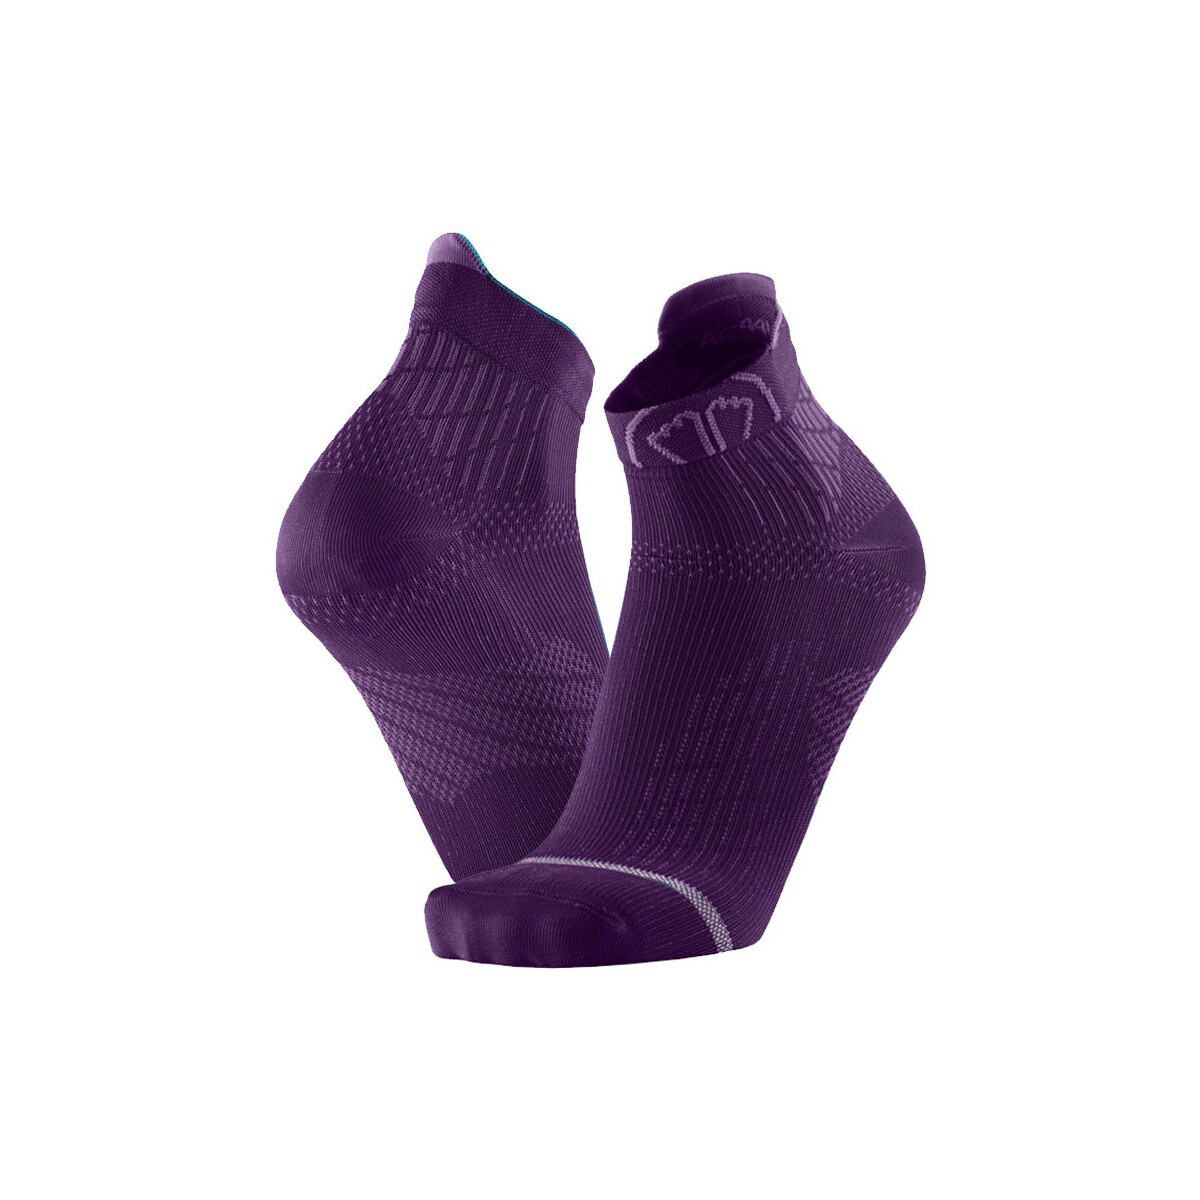 Sidas Violet Chaussettes Run Anatomic Ankle Lady RBrx57lO